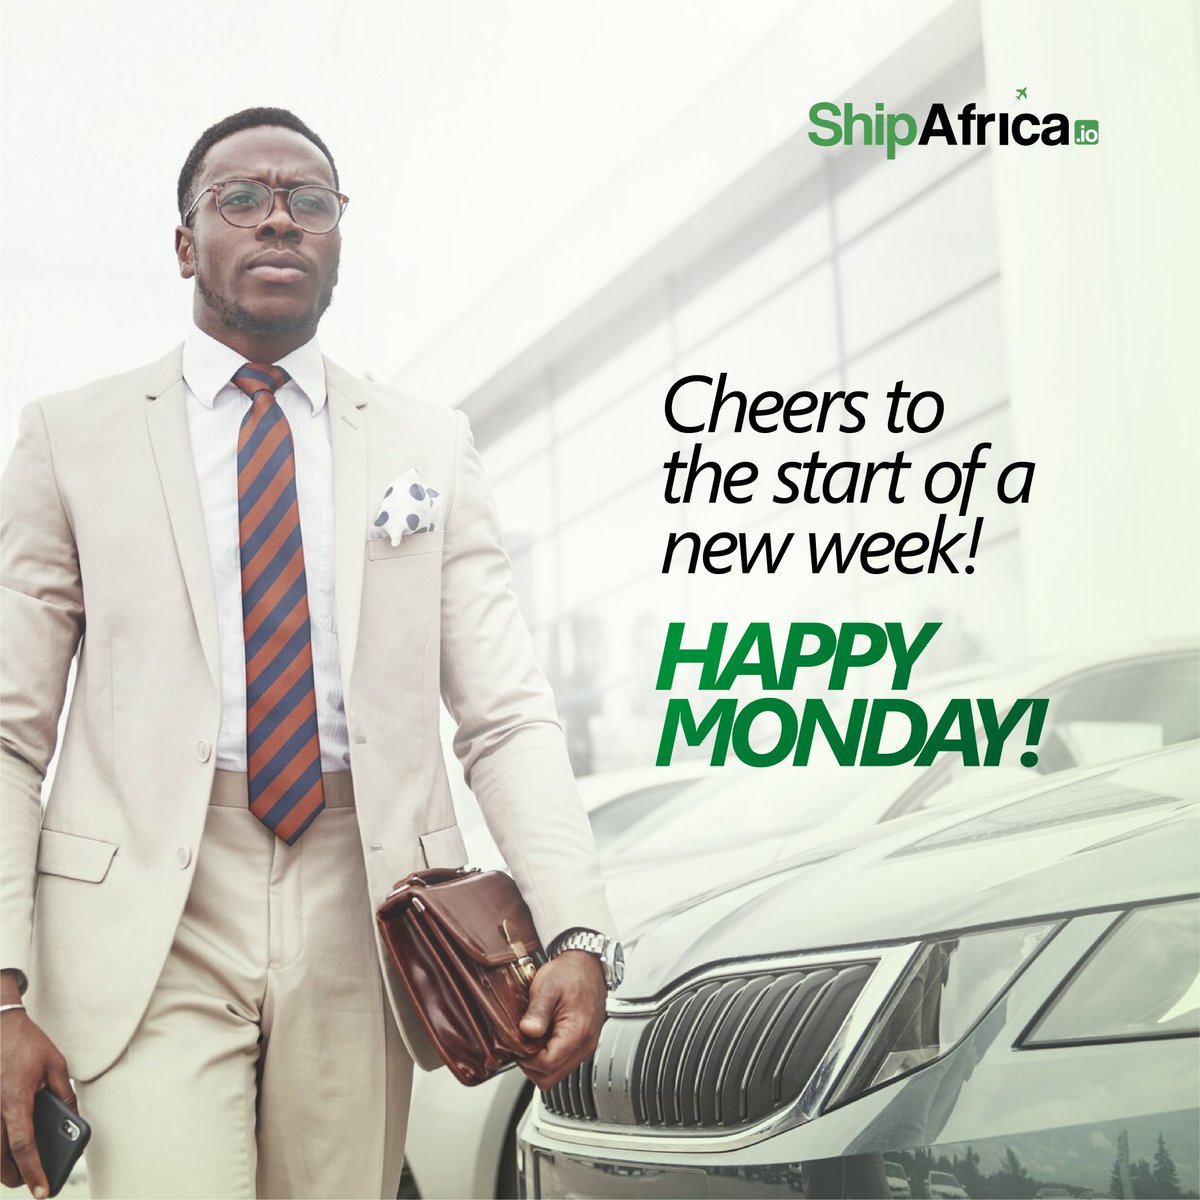 Cheers to the start of a new week! May it be filled with opportunities, productivity, and positive energy. Let's make it a great one!

WANT TO MAKE IT GREATER? PARTNER WITH US.

WE SHIP TO OVER 150 COUNTRIES WORLDWIDE!

#shipping #transport #supplychain #shipafrica #logistics